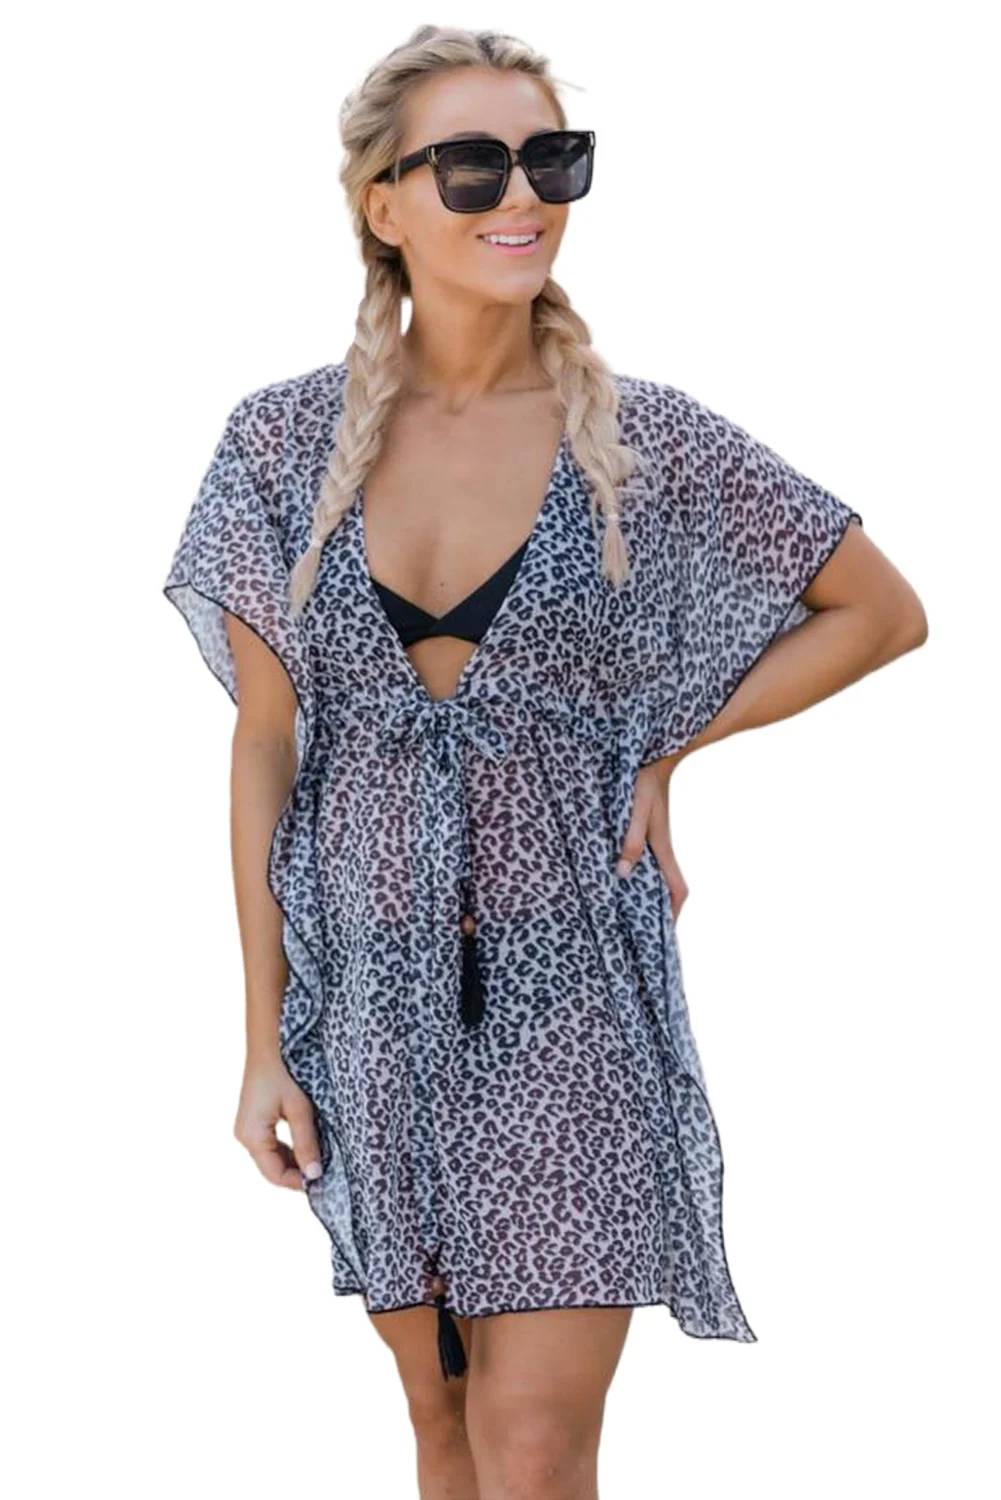 Leopard Print Ruffle Tie Knot V Neck Beach Cover-up